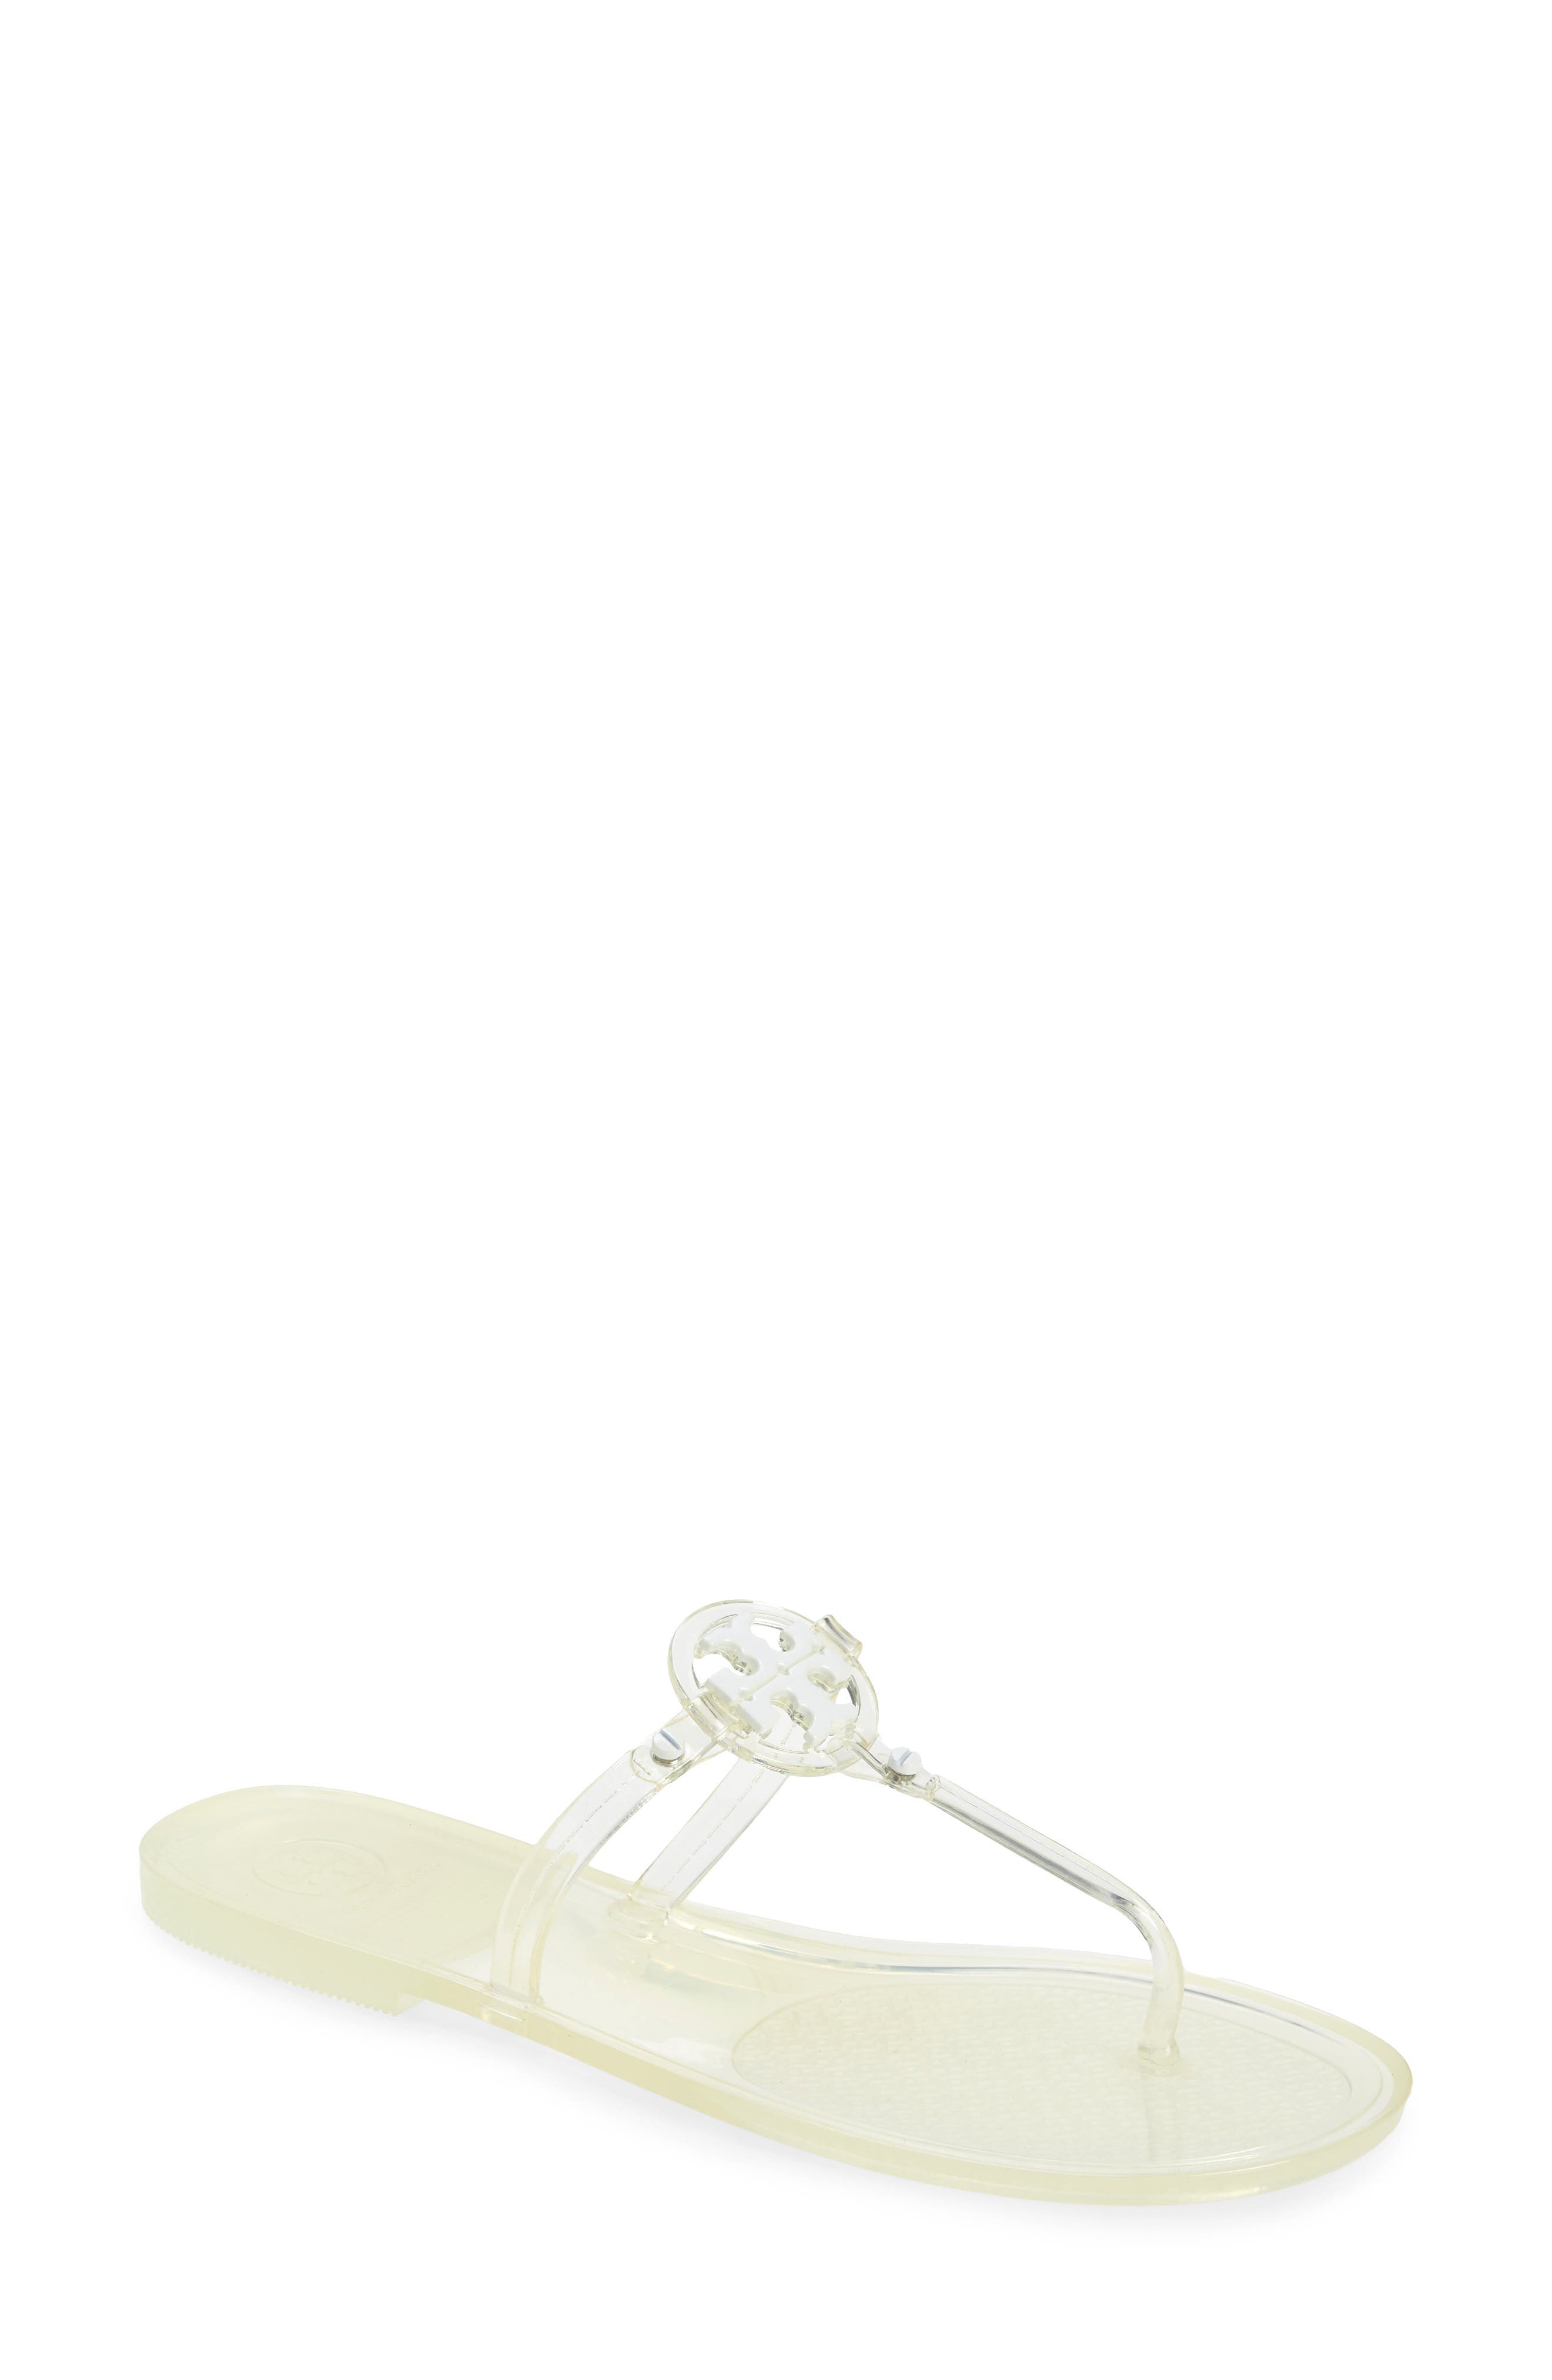 Women's White Tory Burch Shoes | Nordstrom